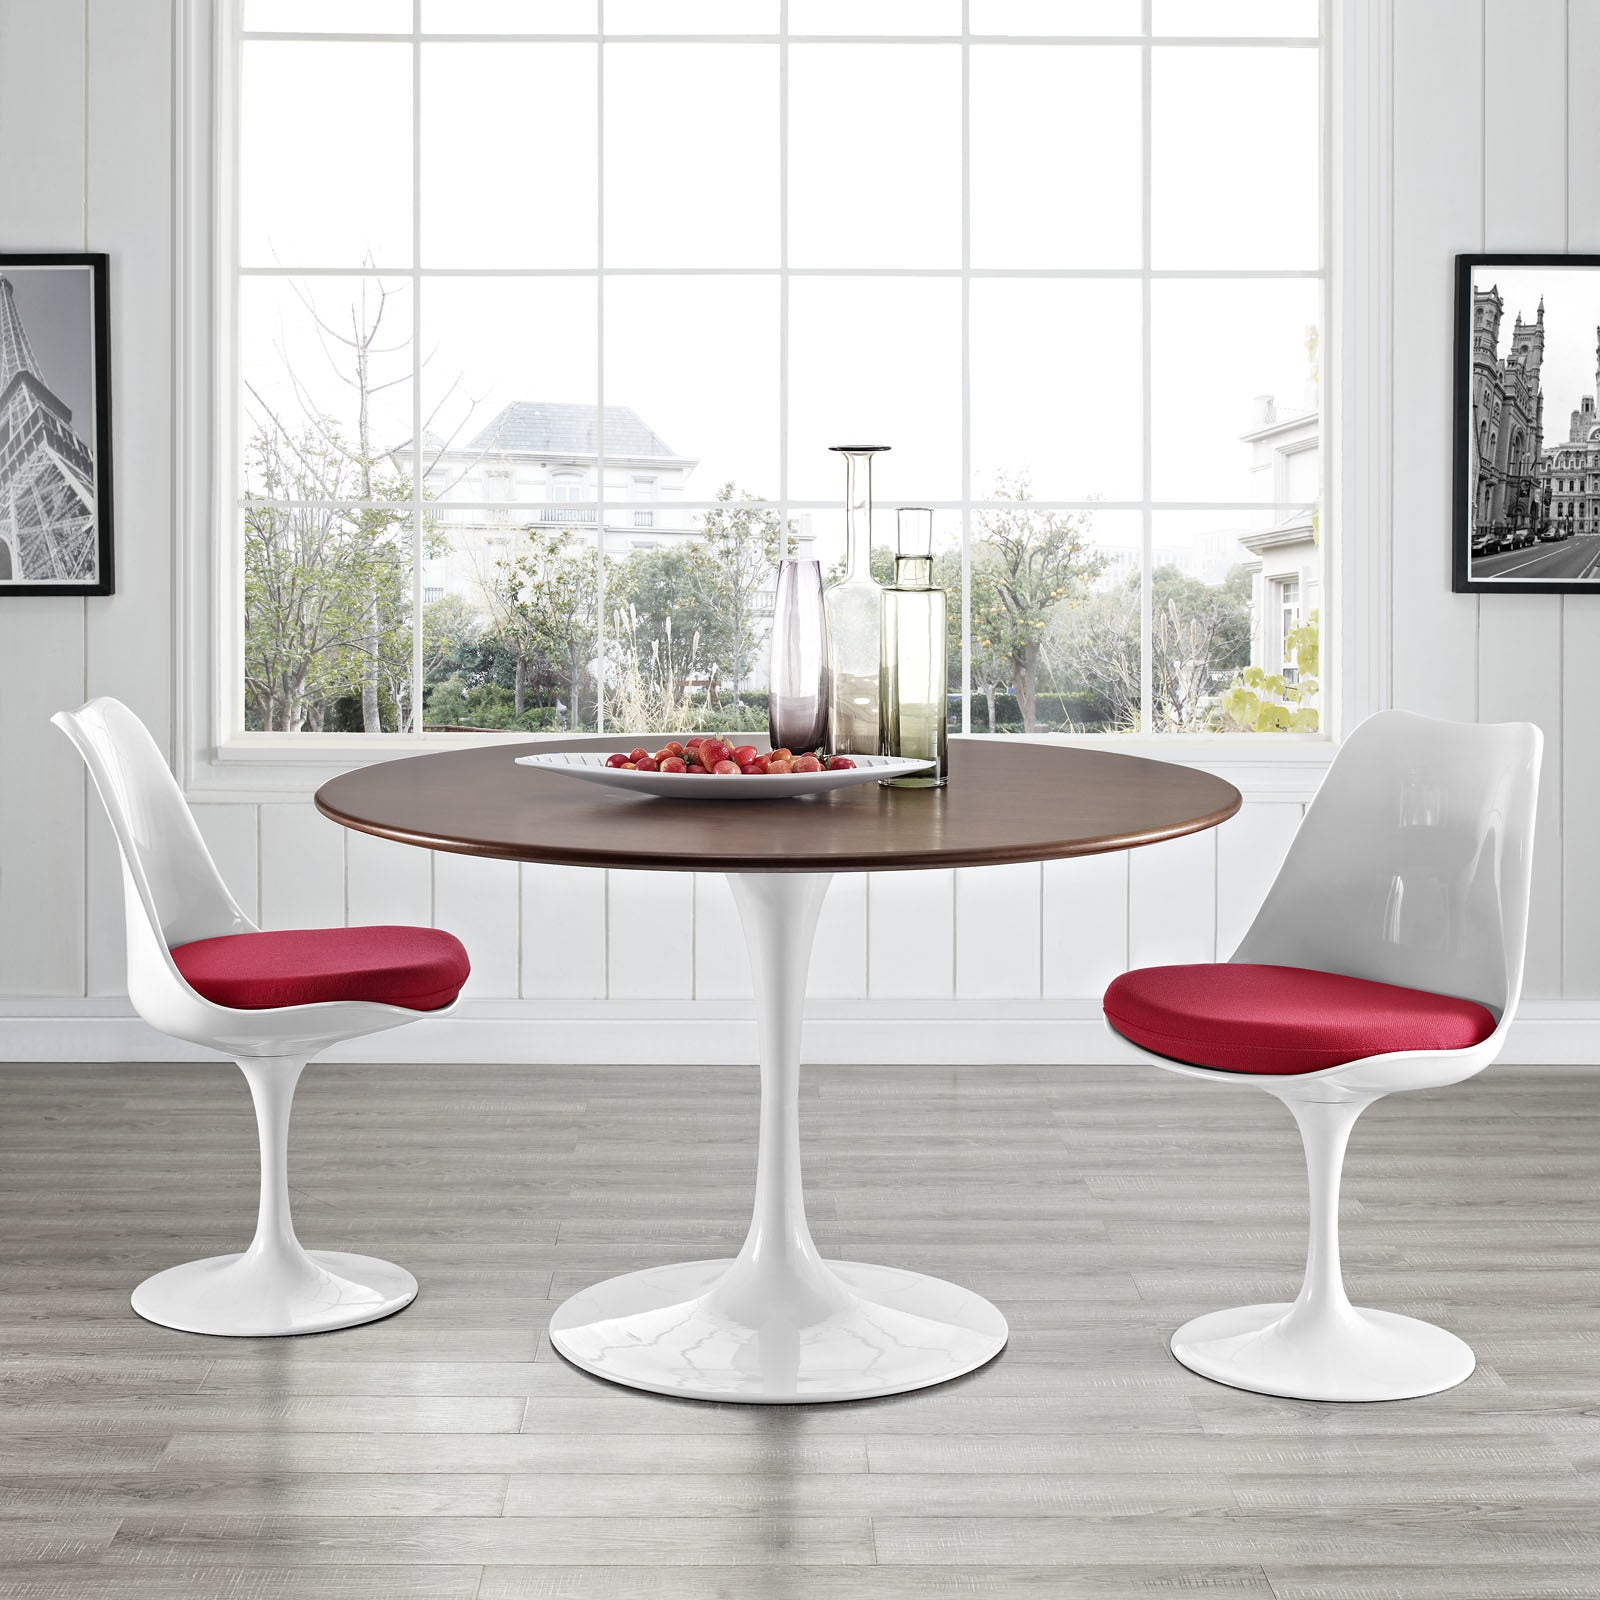 Creatice Saarinen Table for Large Space